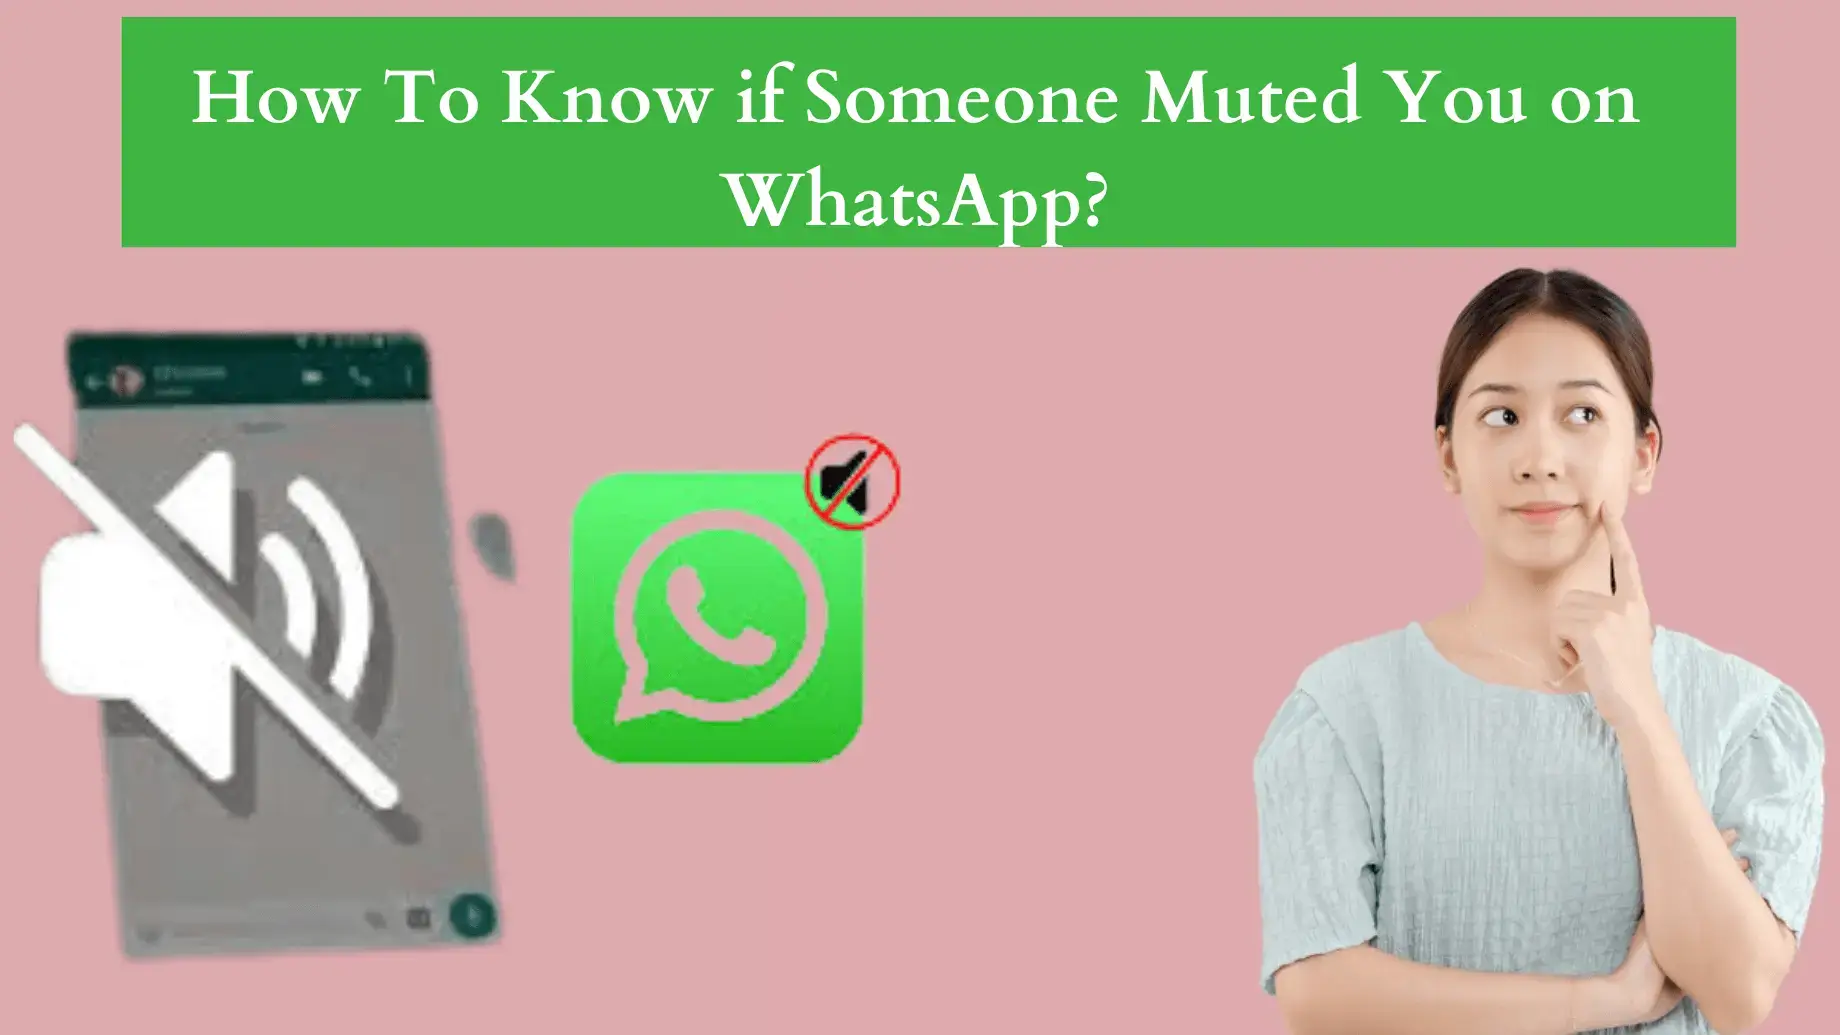 How To Know if Someone Muted You on WhatsApp